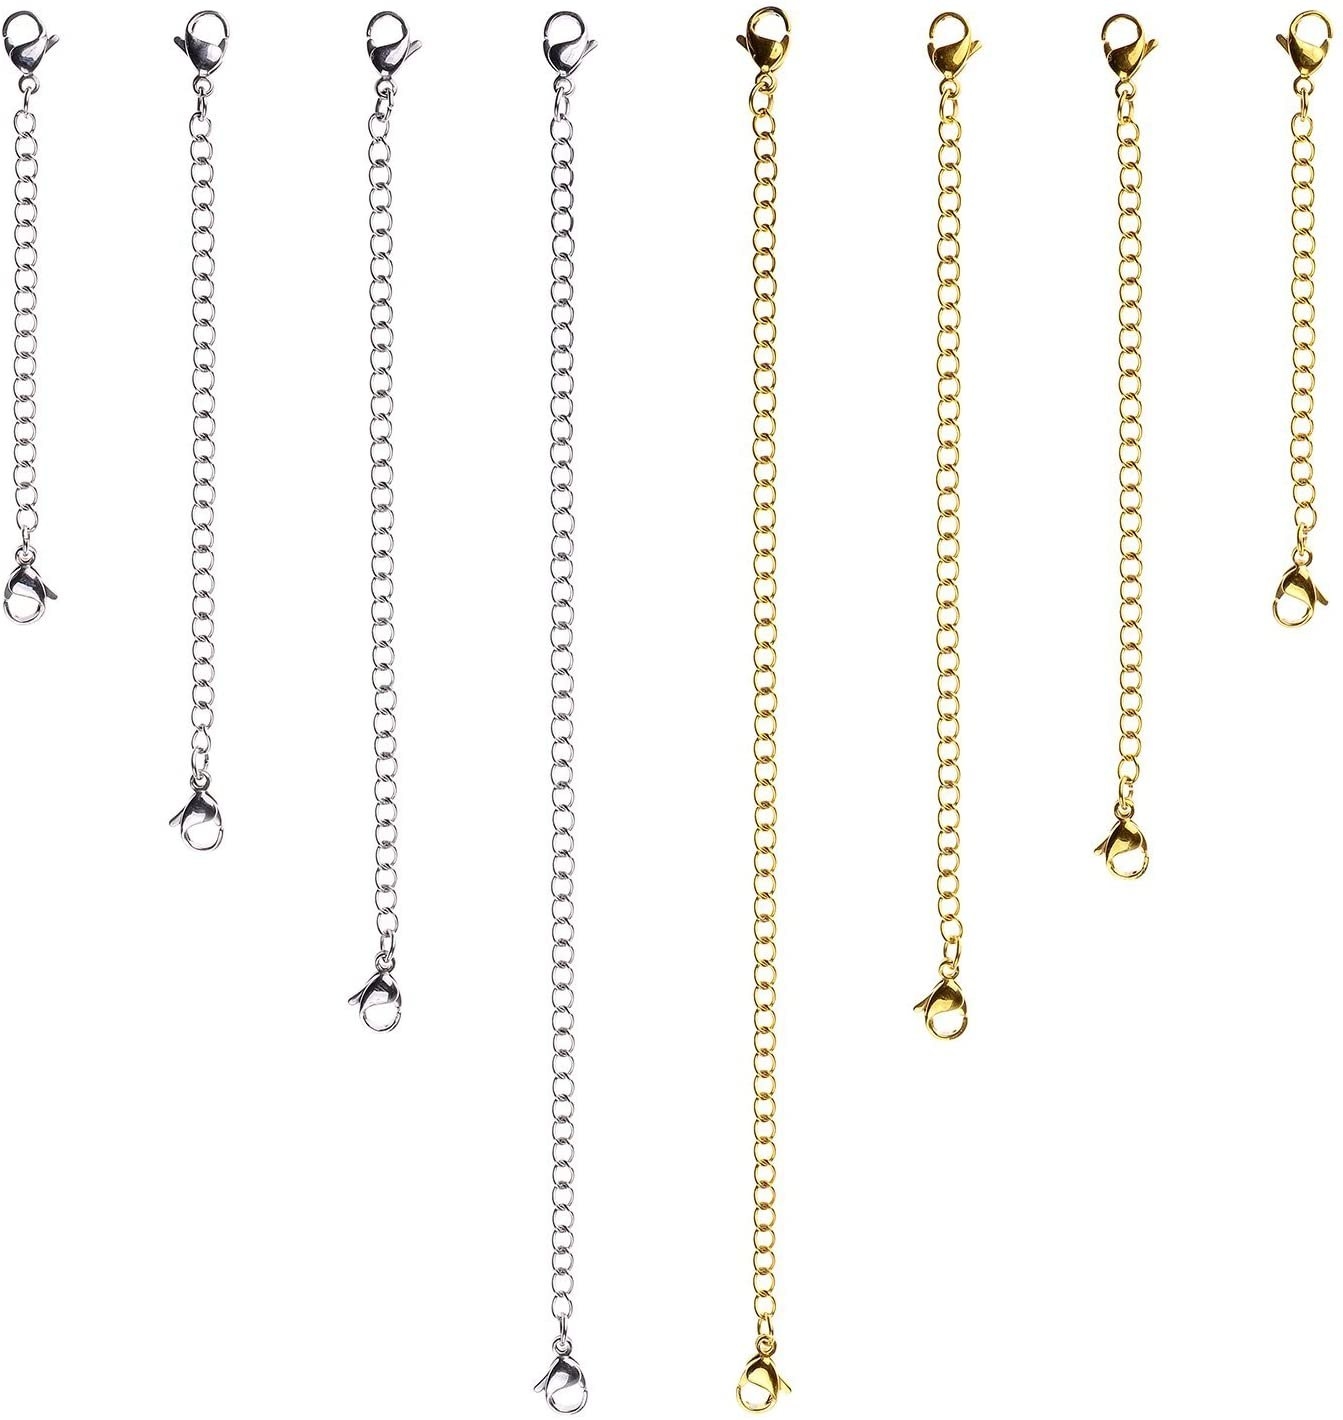 The extender chains in gold and silver with two lobster clasps on each end. They vary in size